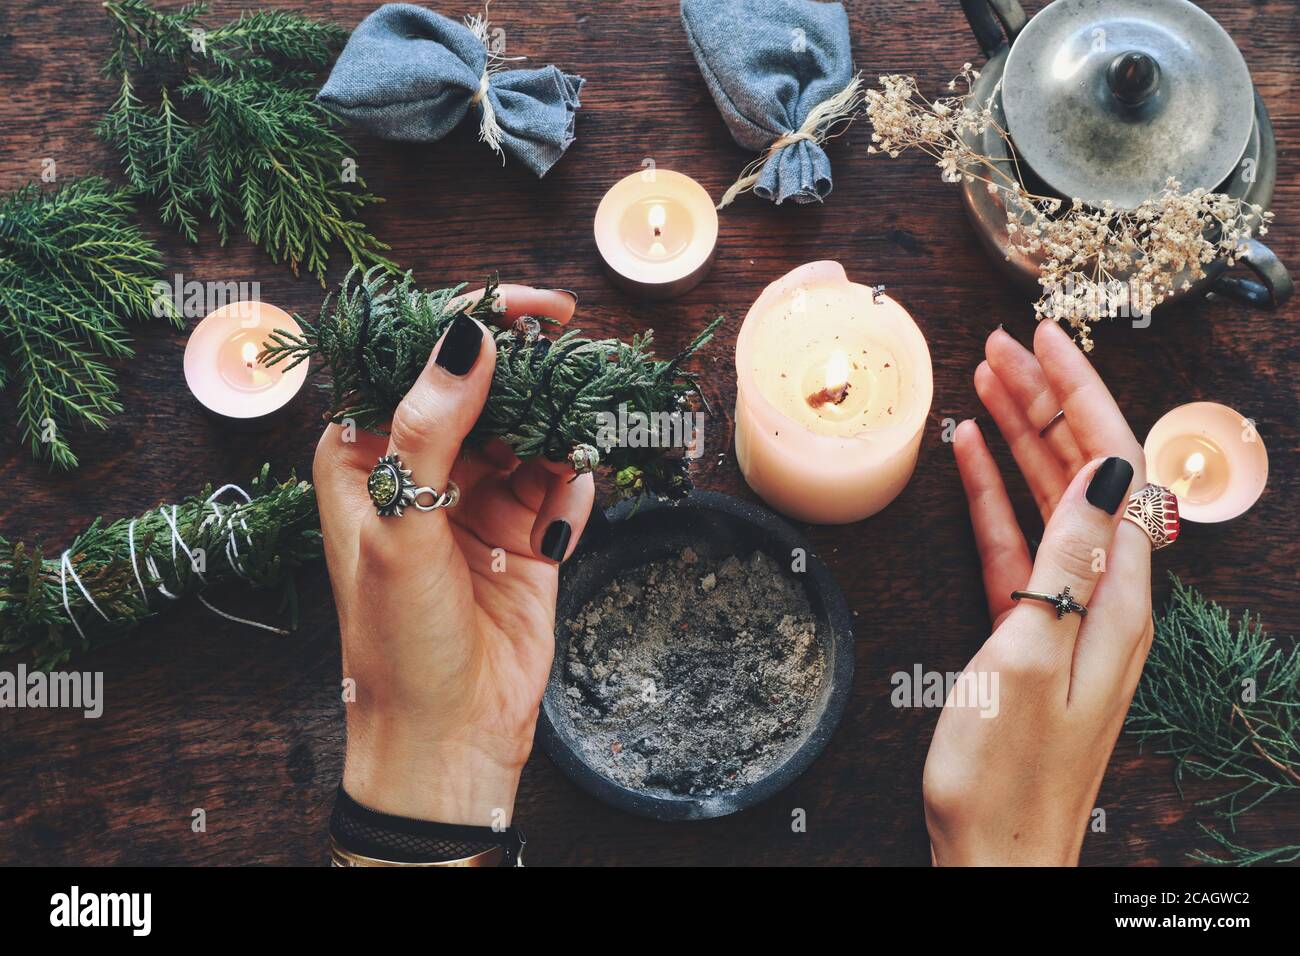 Wiccan witch holding cedar cleansing stick to cleanse the energy at her altar. Female woman holding evergreen smoke cleansing stick in her hands Stock Photo